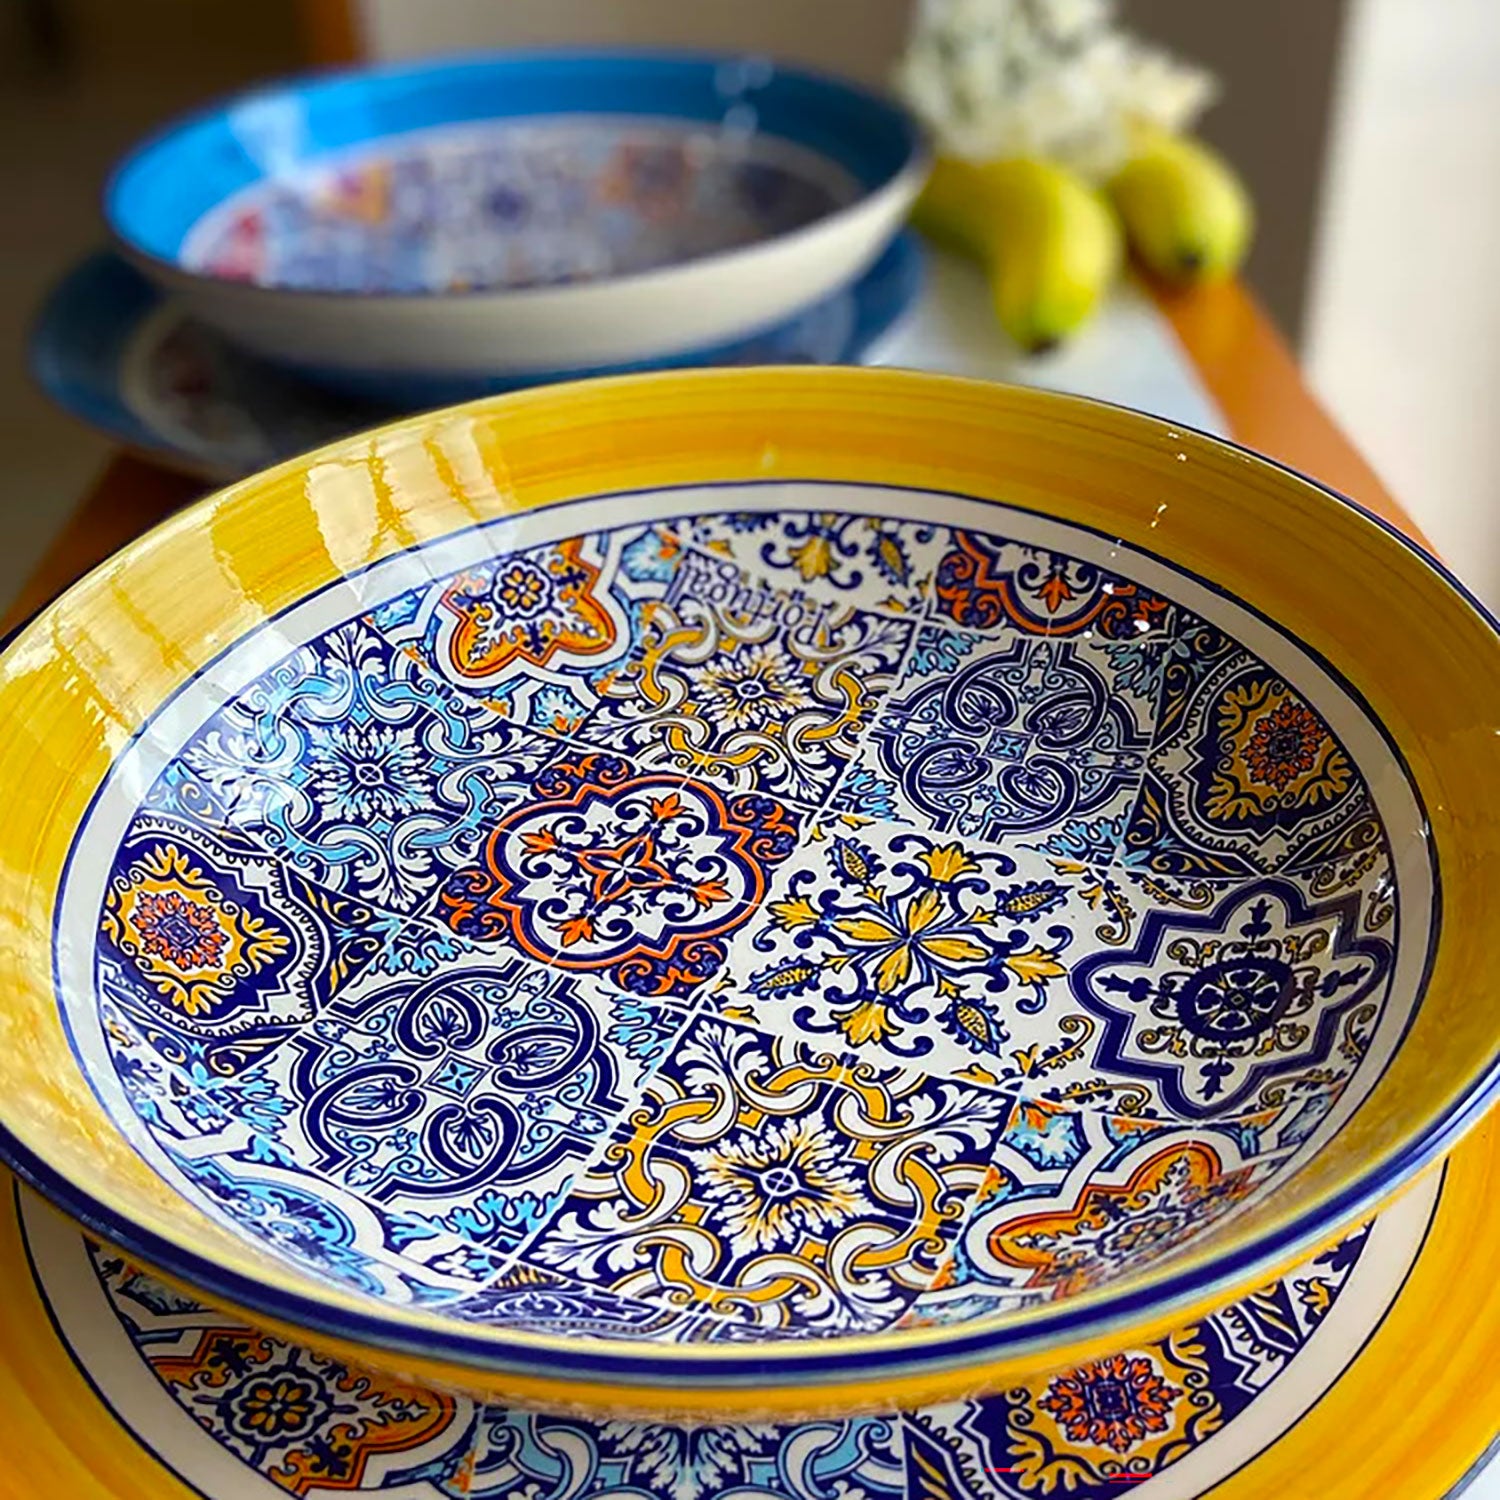 Portuguese ceramic round salad serving bowl with a colorful tiles patterns with yellow and blue shades.